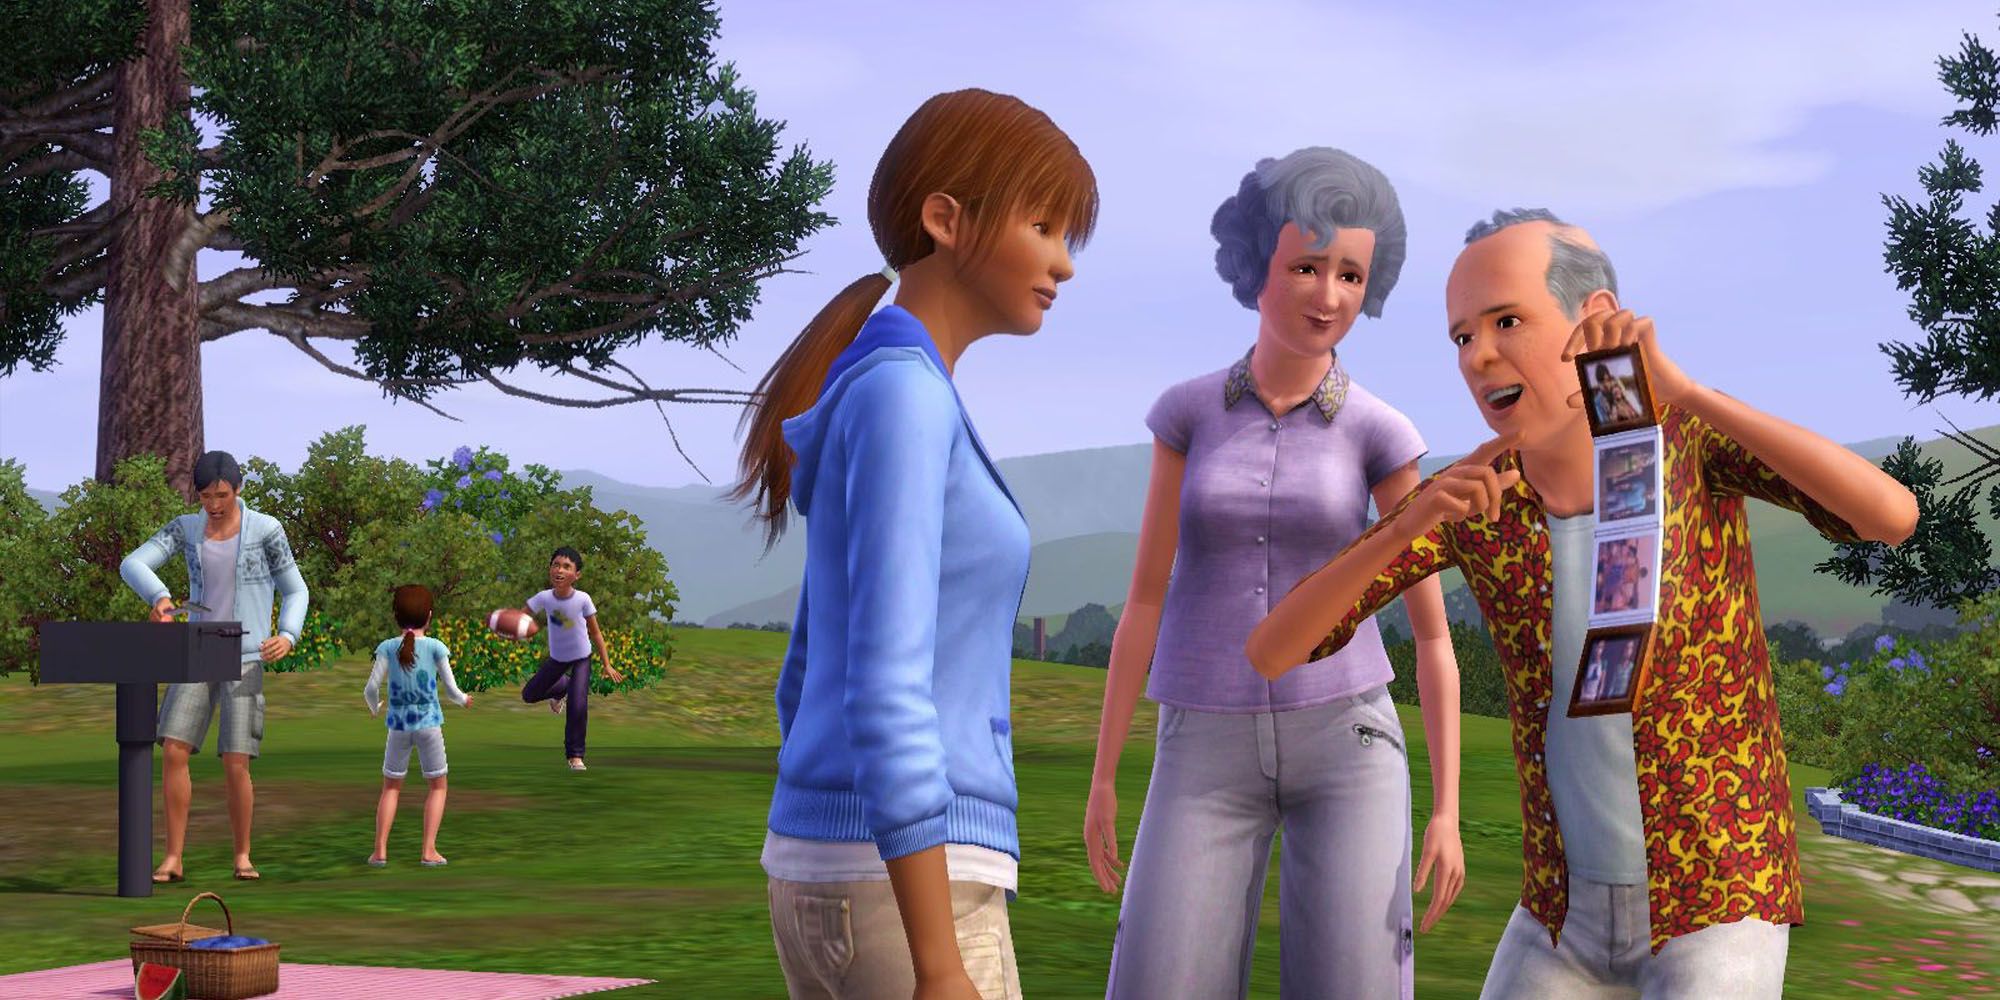 The Sims 3: Generations gameplay